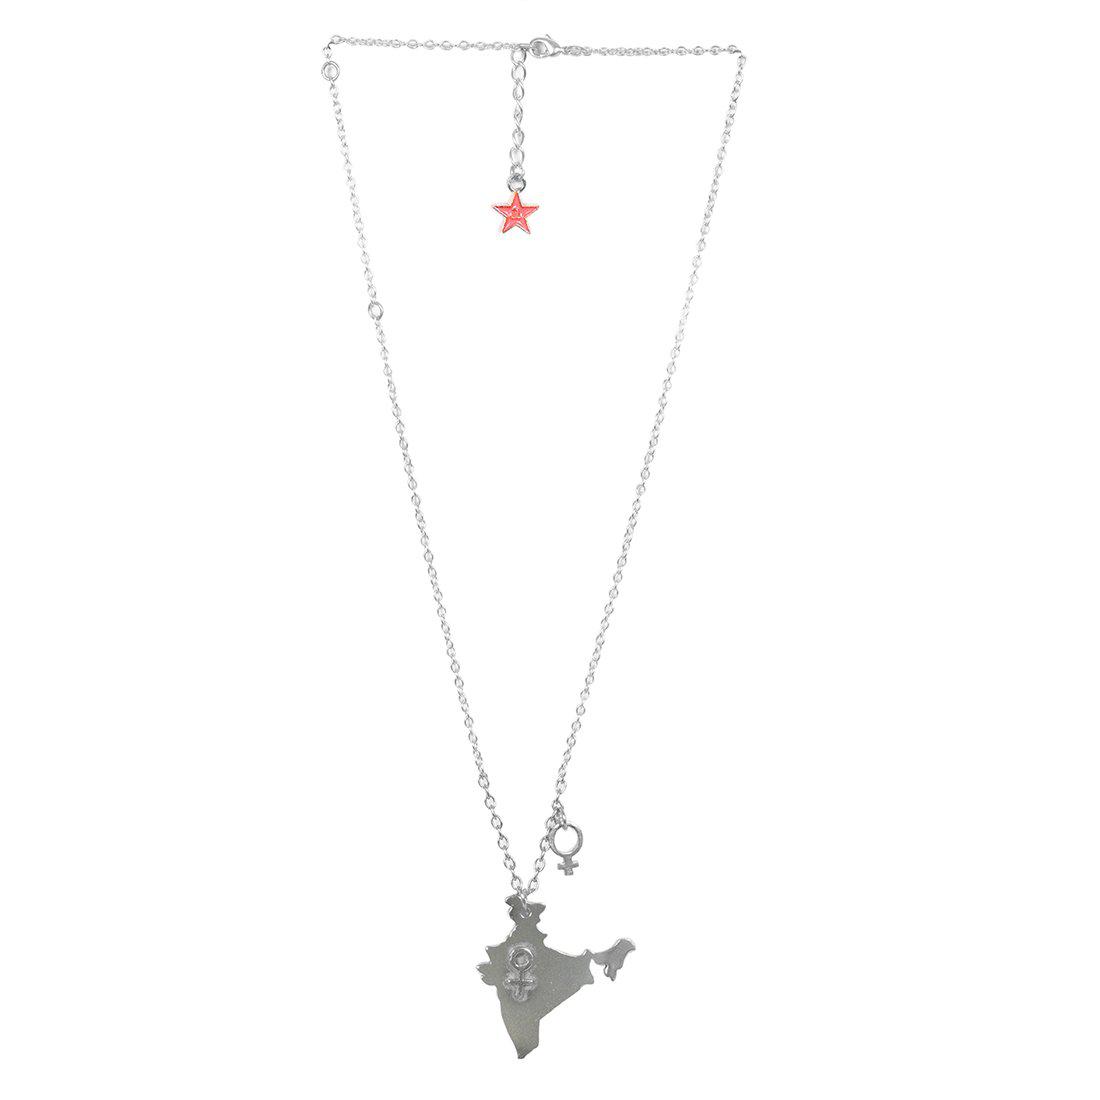 INDIA MAP CHAIN NECKLACE WITH GIRL CHARM